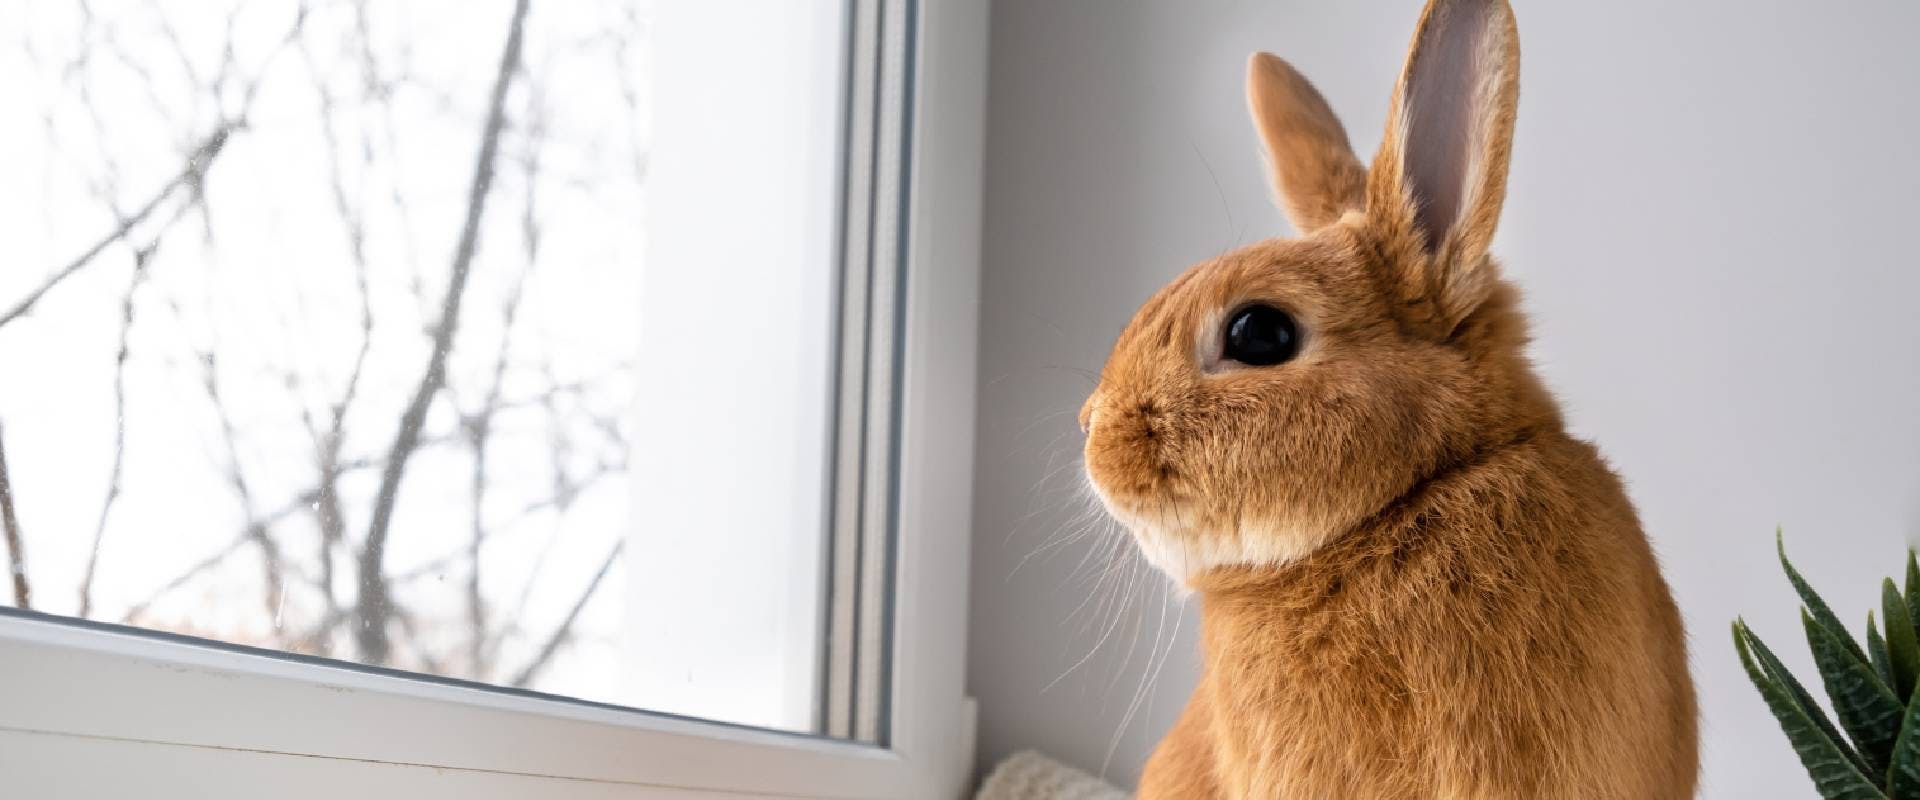 Rabbit looking out of a window